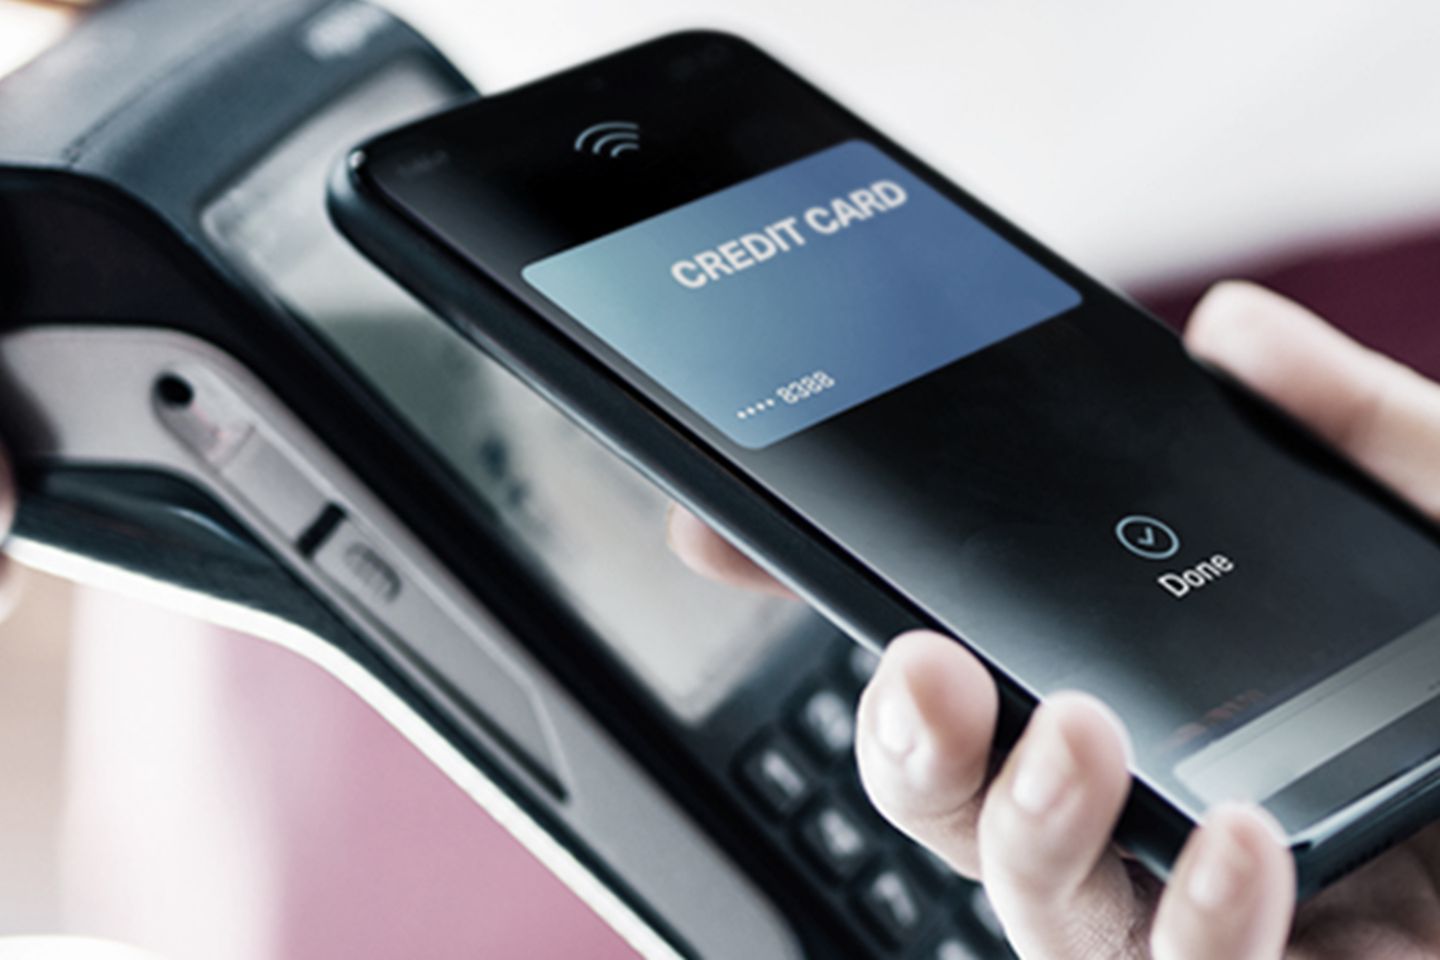 Smartphone is held up to EC card reader. Non-contact payment transaction. 